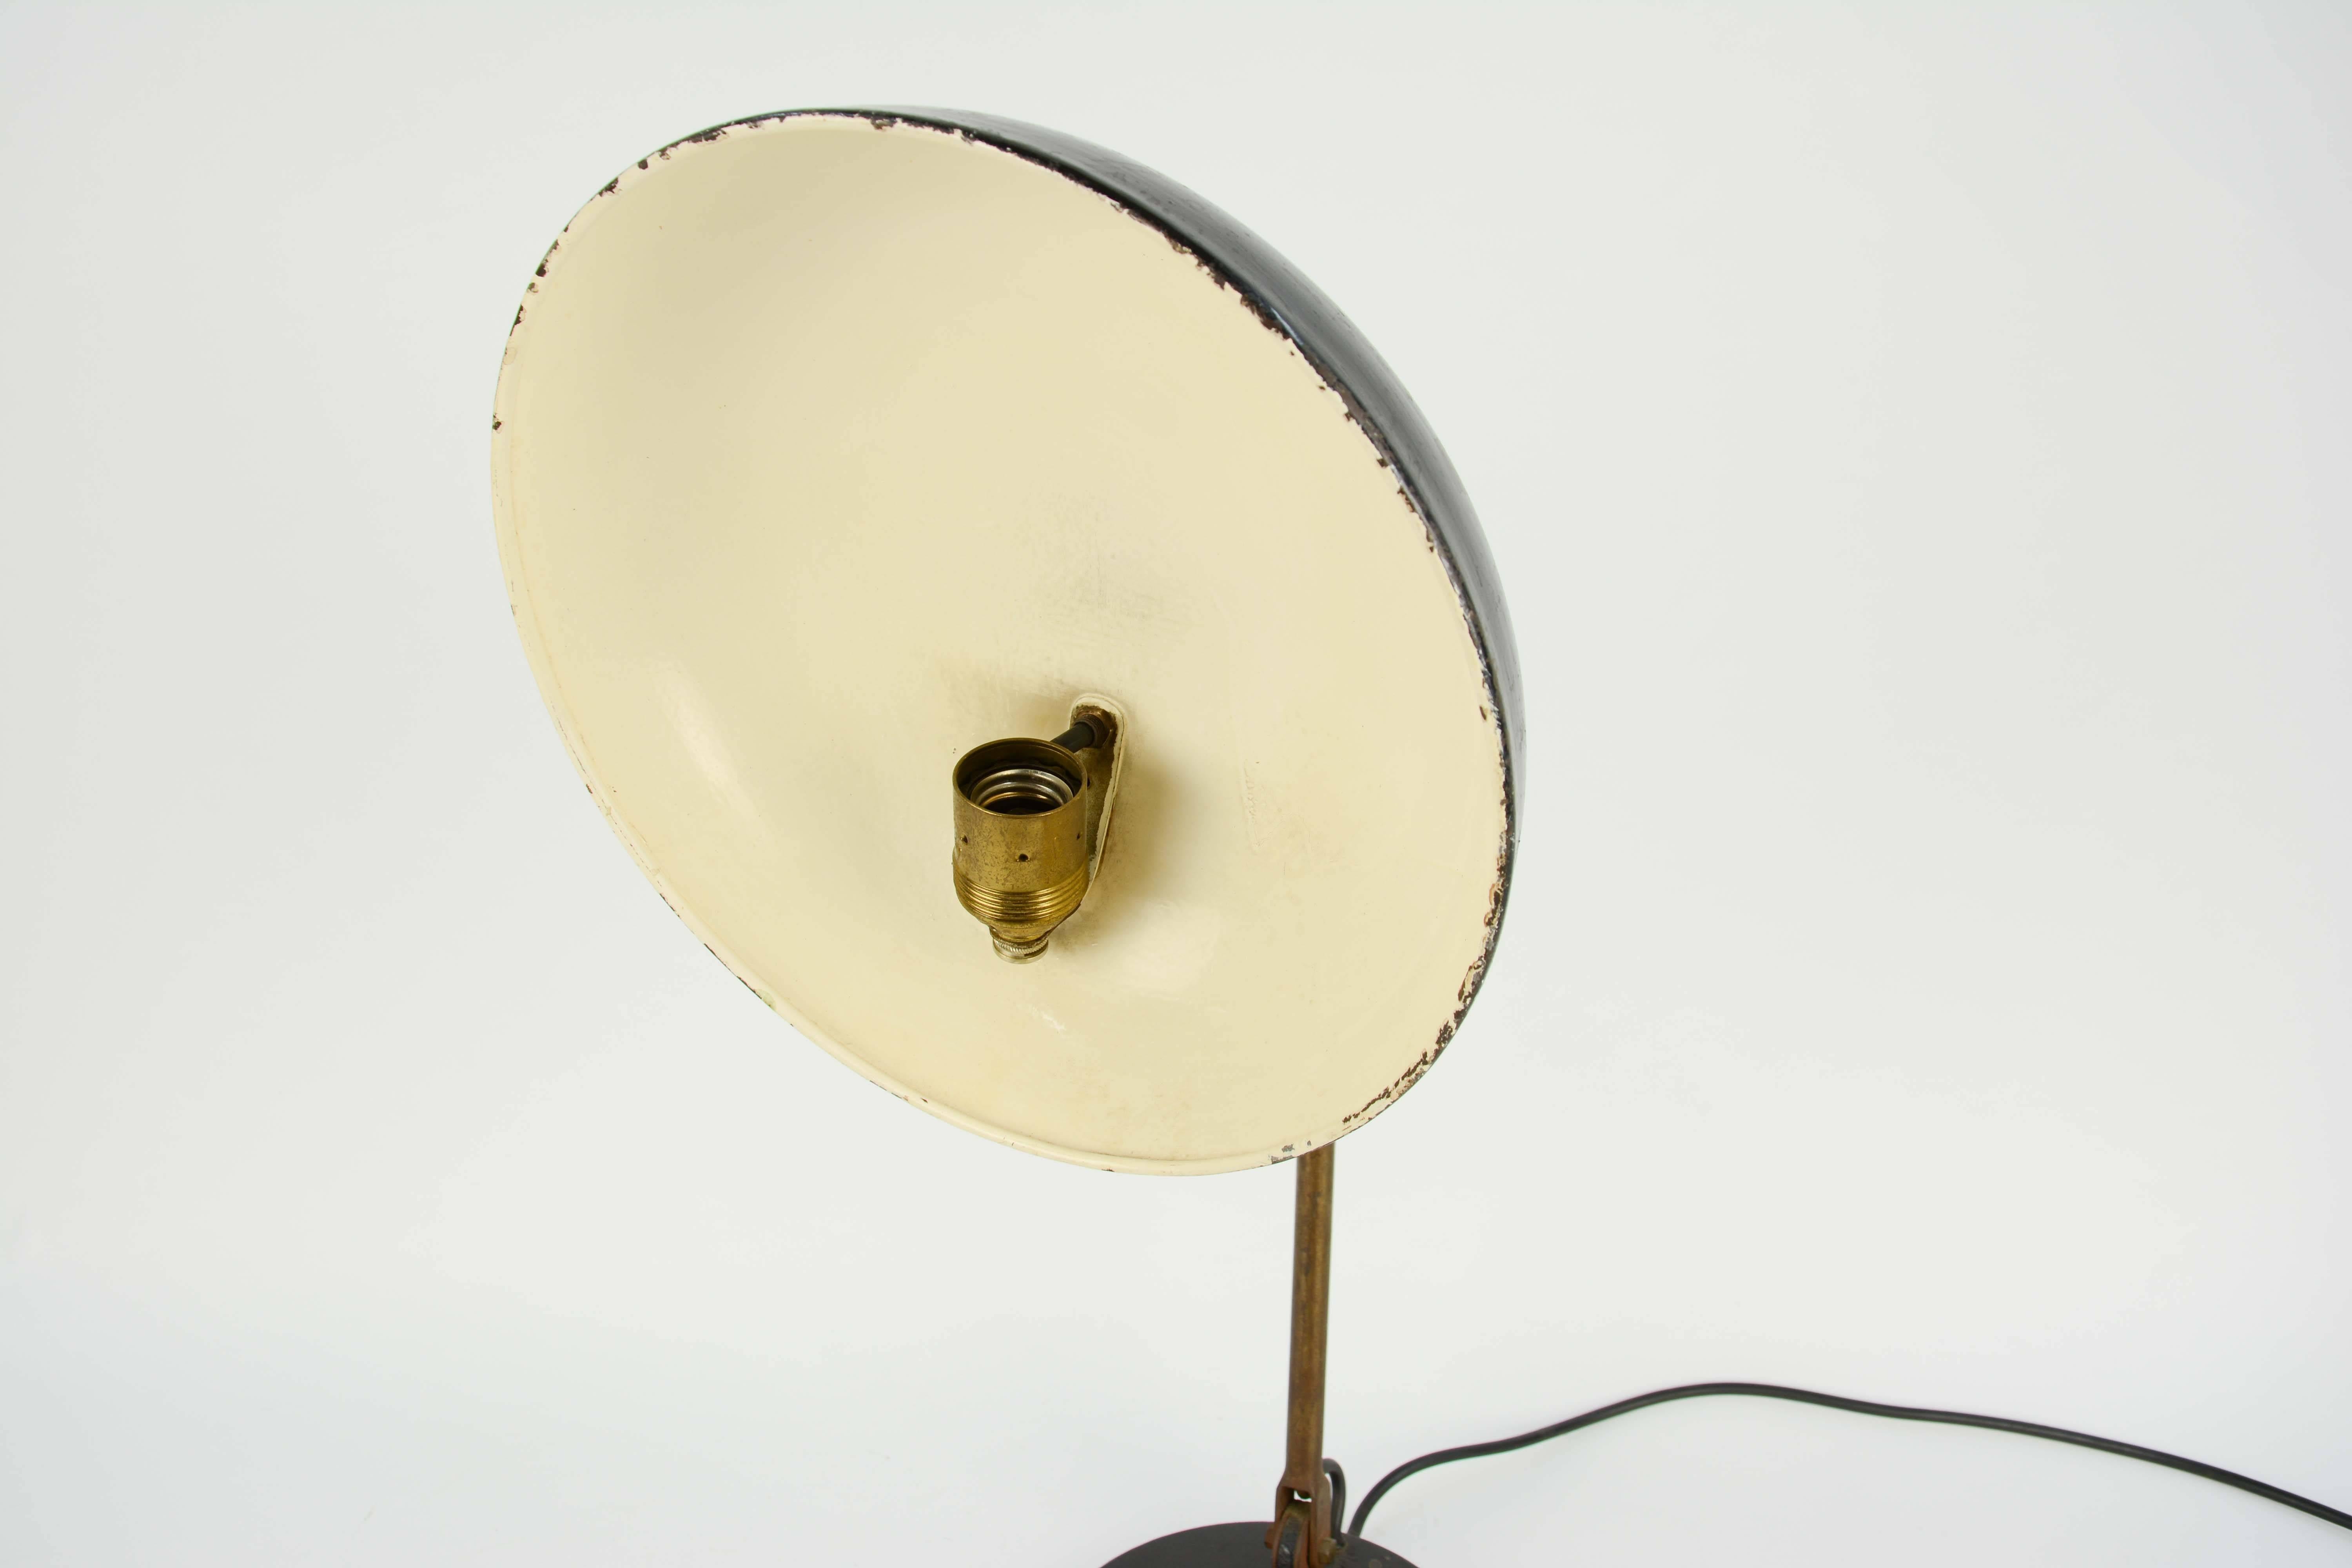 1920s Finely Tooled German Industrial Desk Lamp with Directional Shade 1